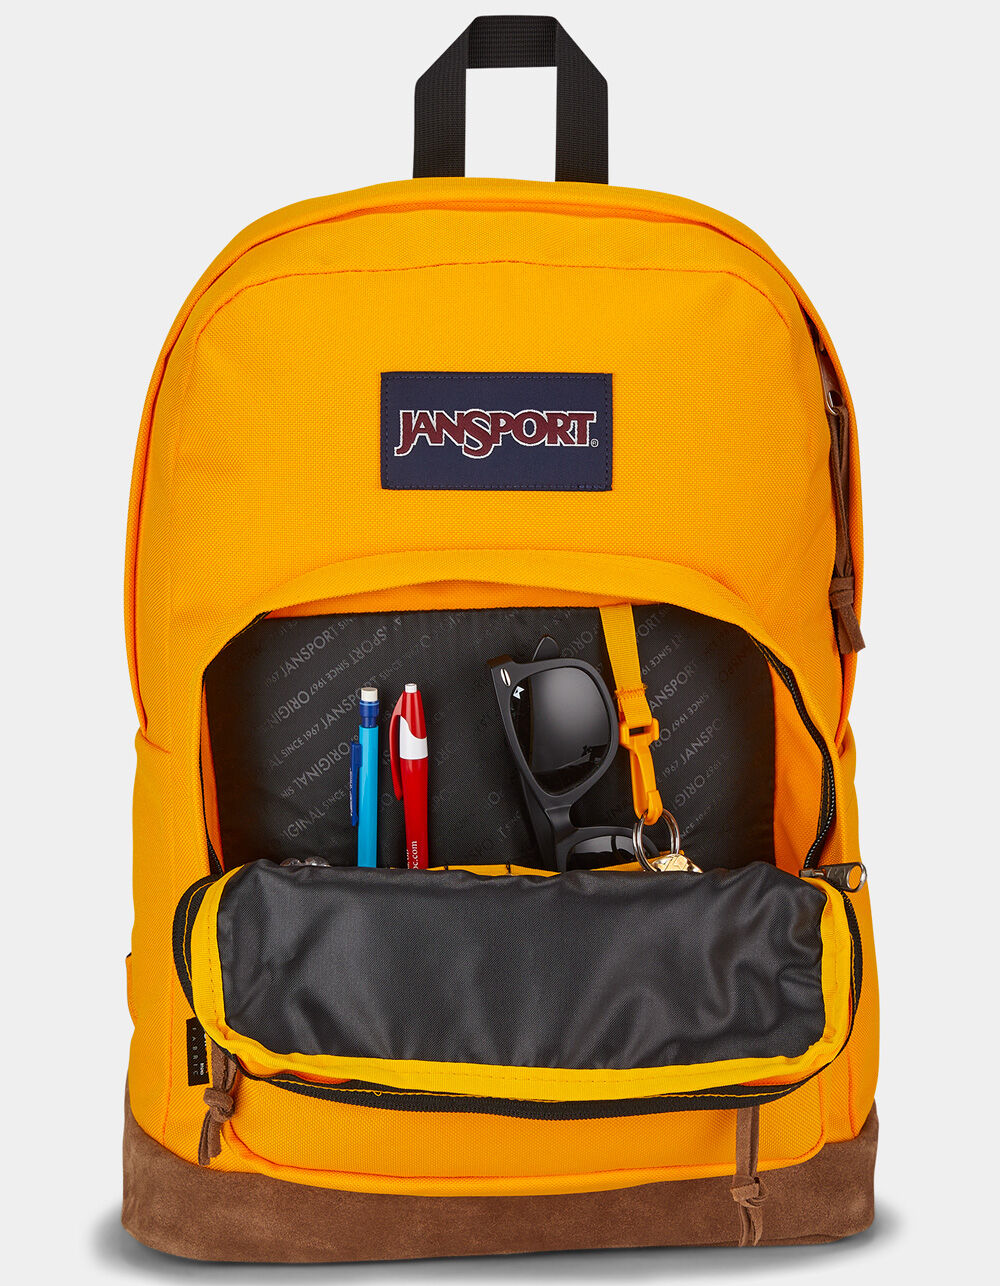 This Giant Jansport Backpack Is Perfect For Packing Just The Essentials